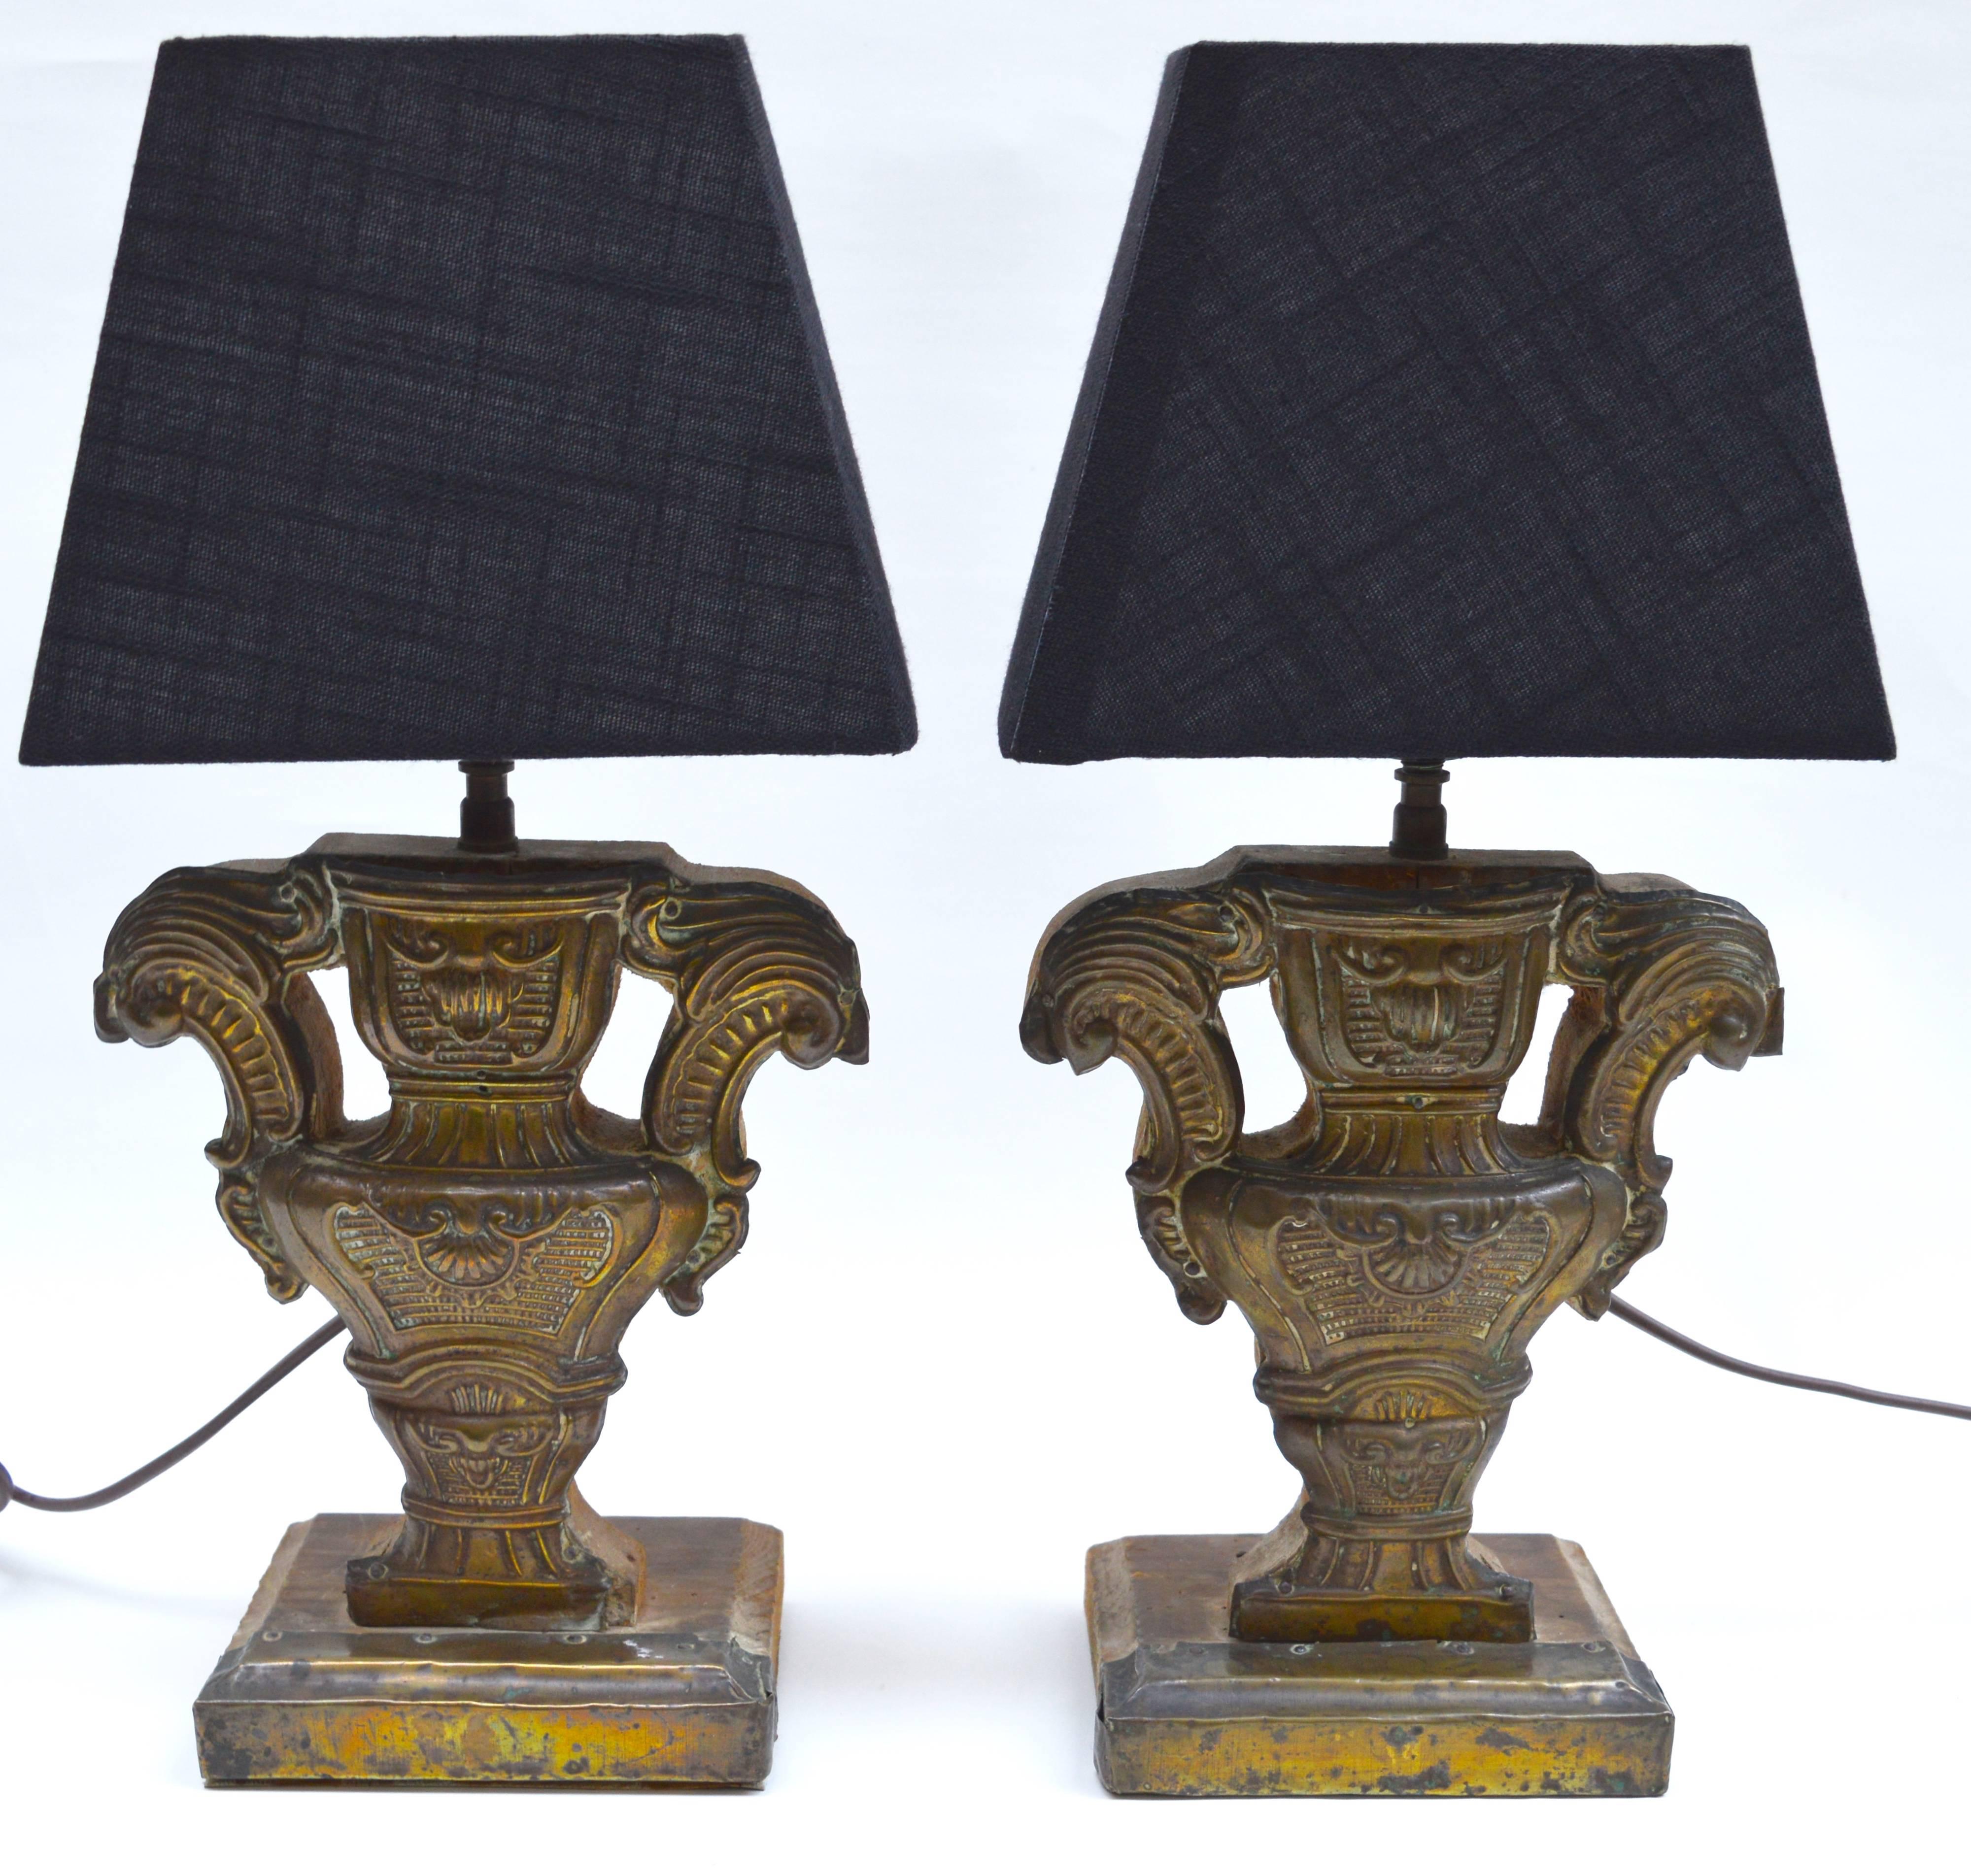 A pair of Italian 18th century altar candlesticks transformed into table lamps.
The base is pine wood covered in beautifully hand worked repousse brass. Great patina that can only acquired from time and use.
**Including black shades.
 